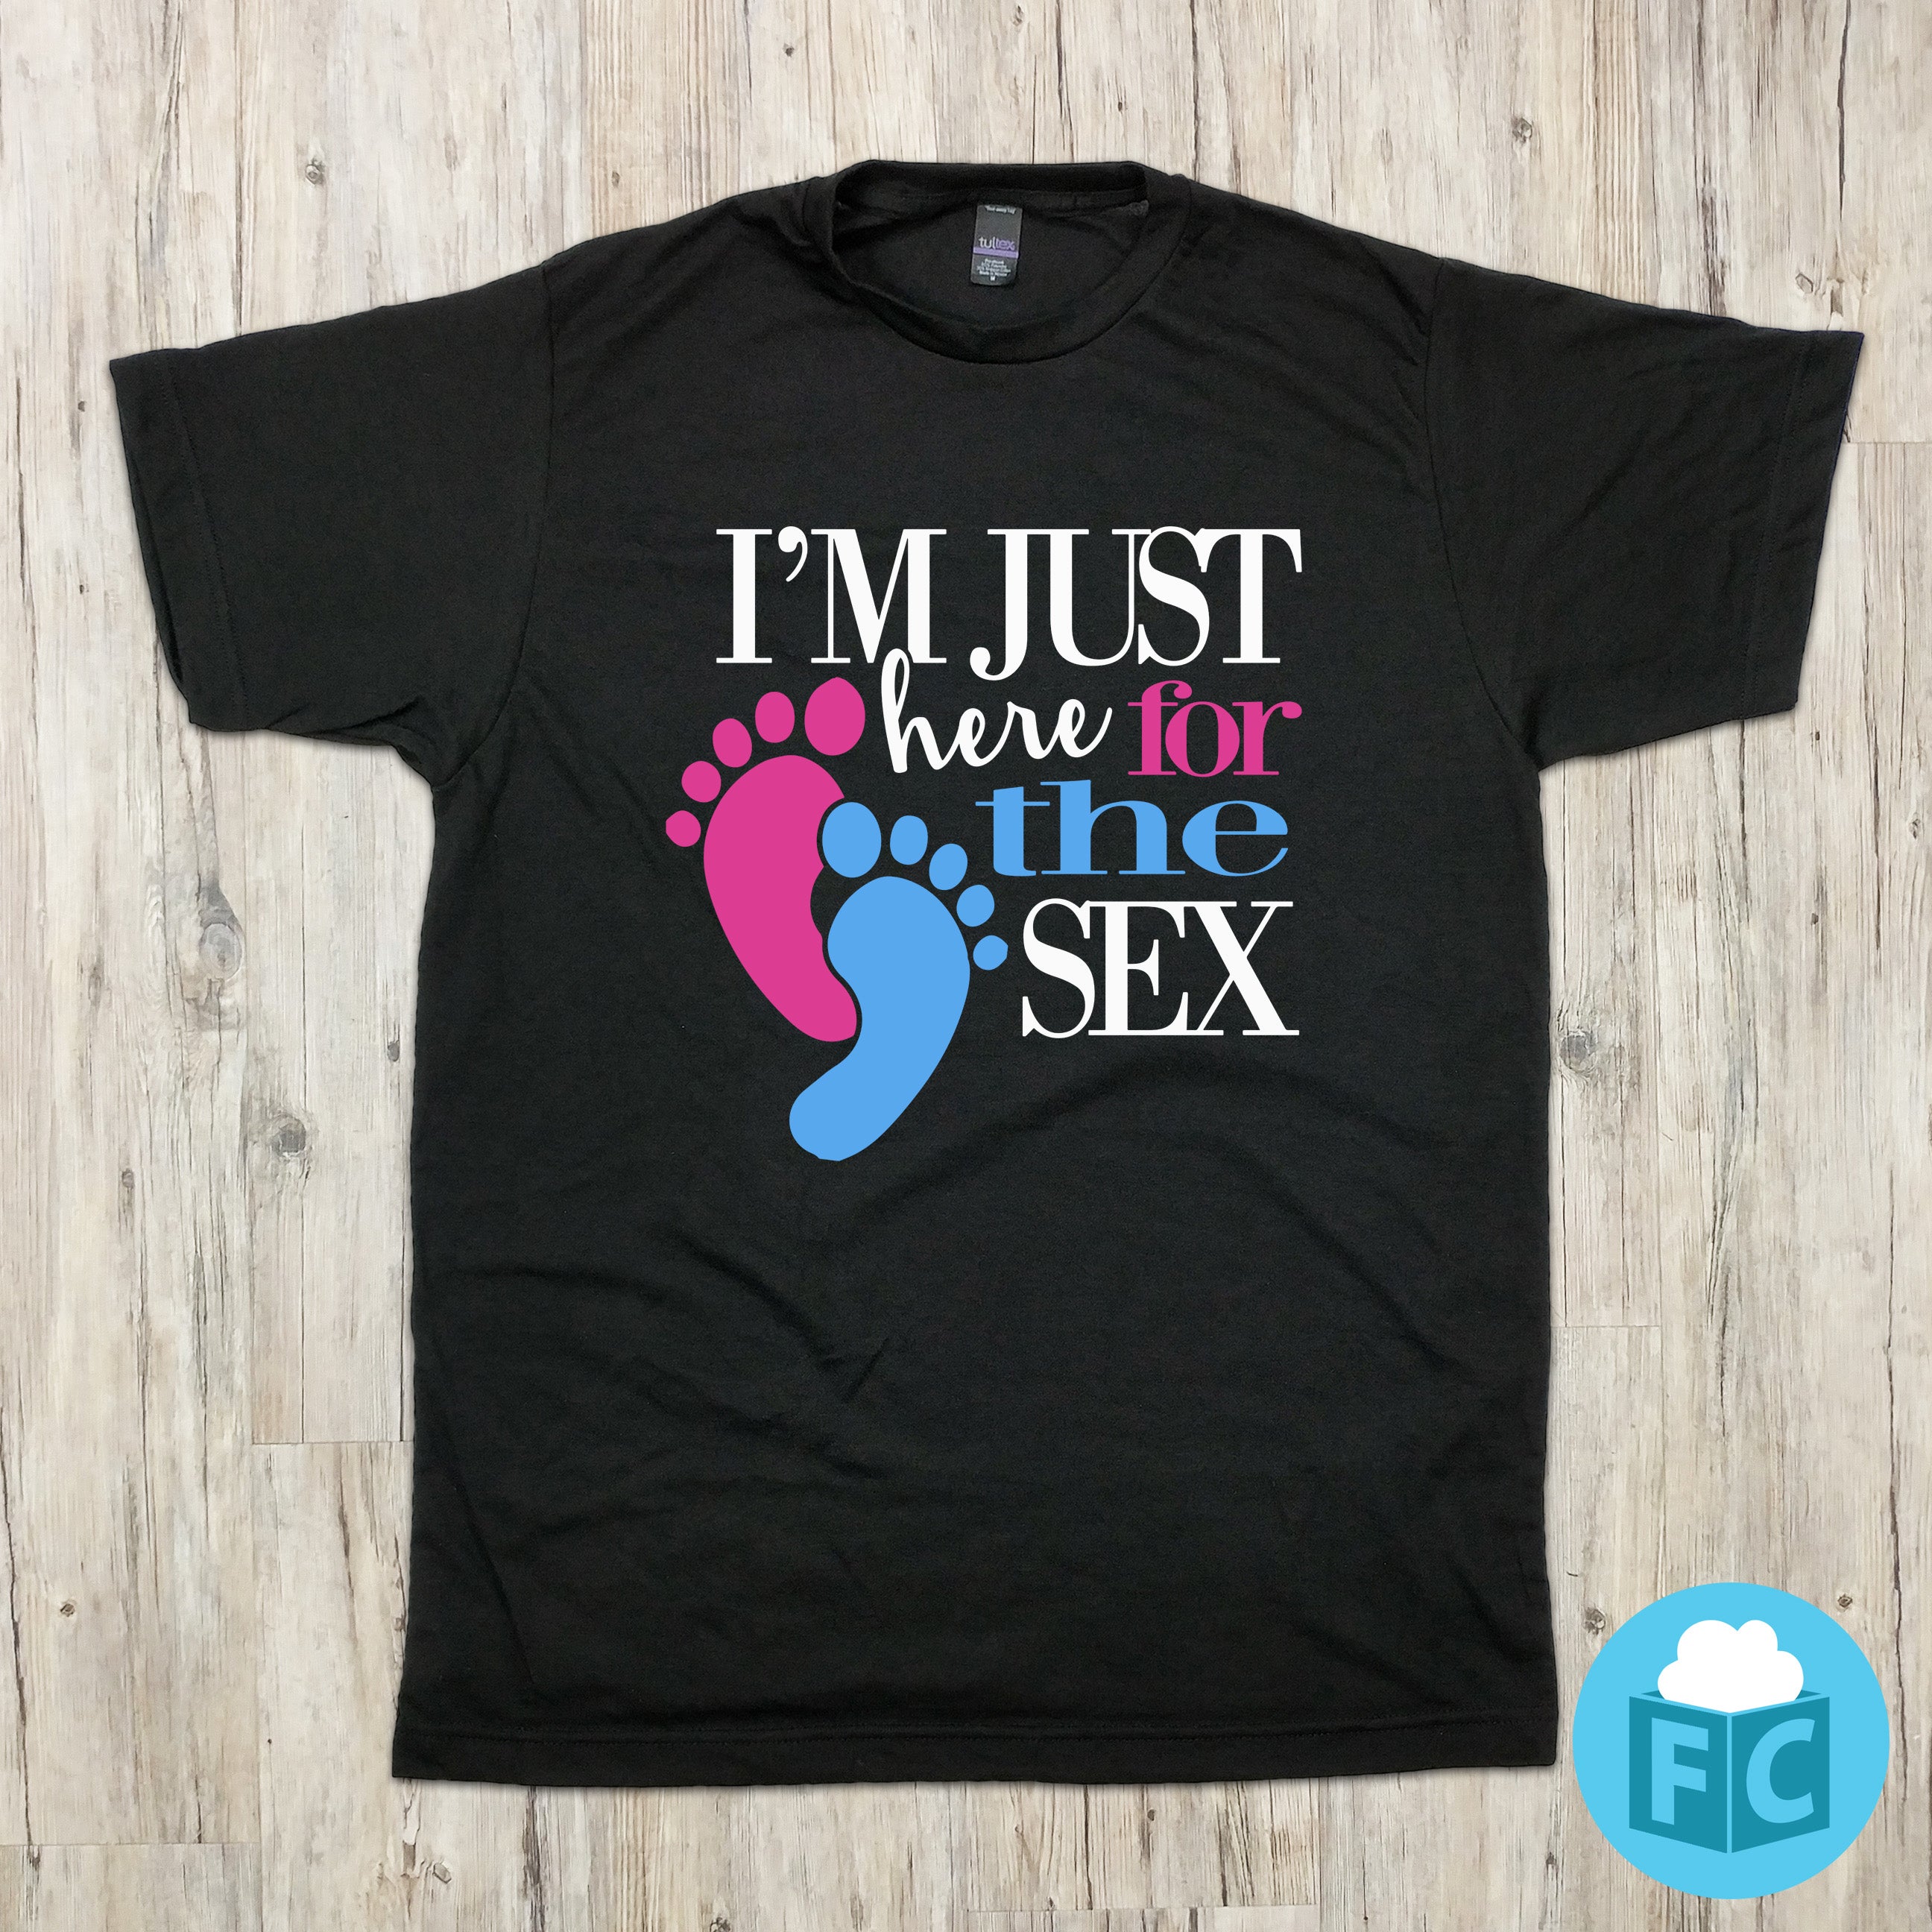 Im Just Here For The Sex Gender Reveal Shirts Fluffy Crate